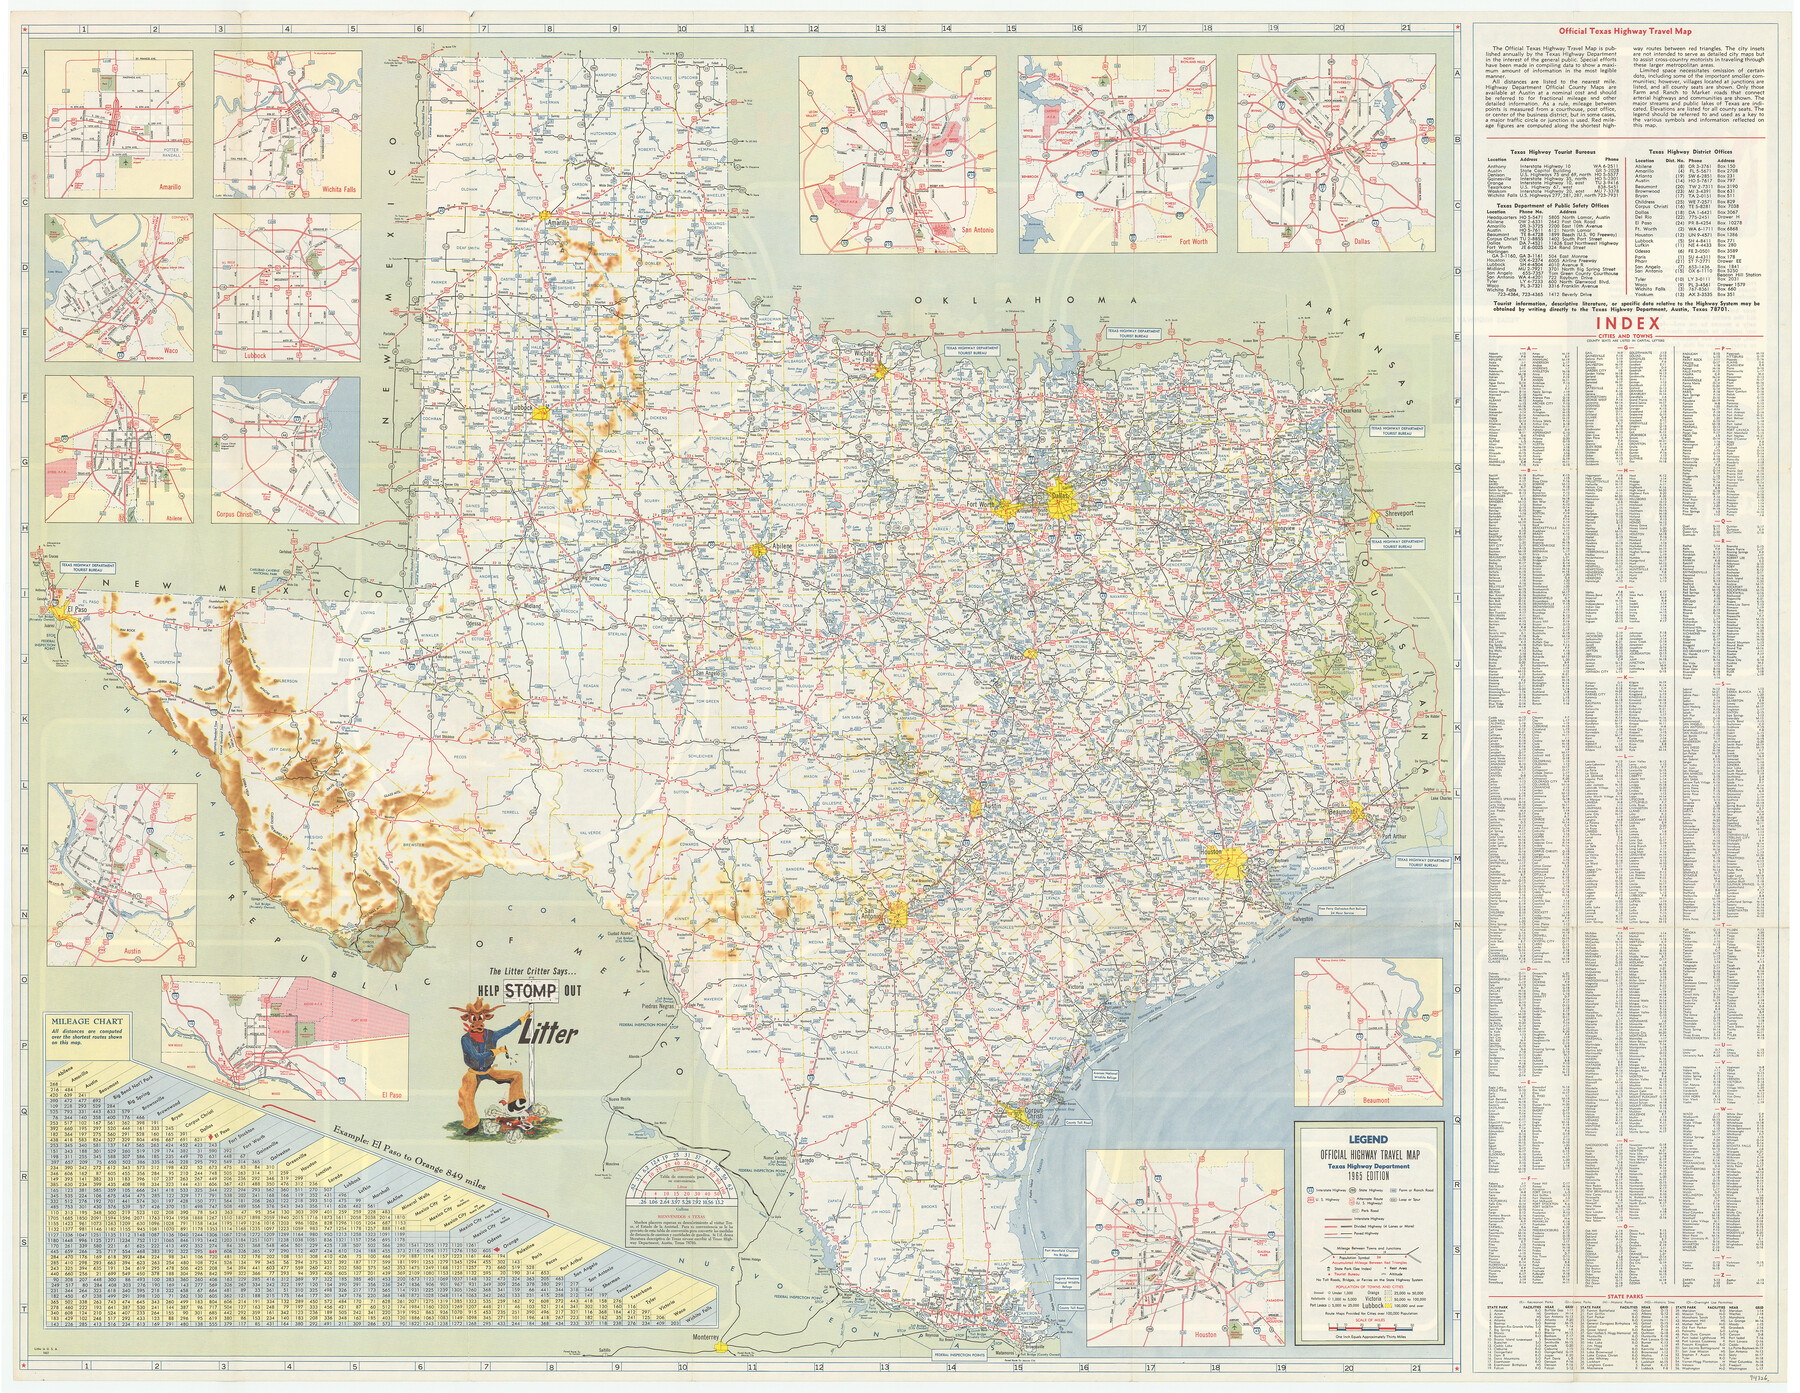 94326, America's Fun-Tier: Texas 1965 Official Highway Travel Map, General Map Collection